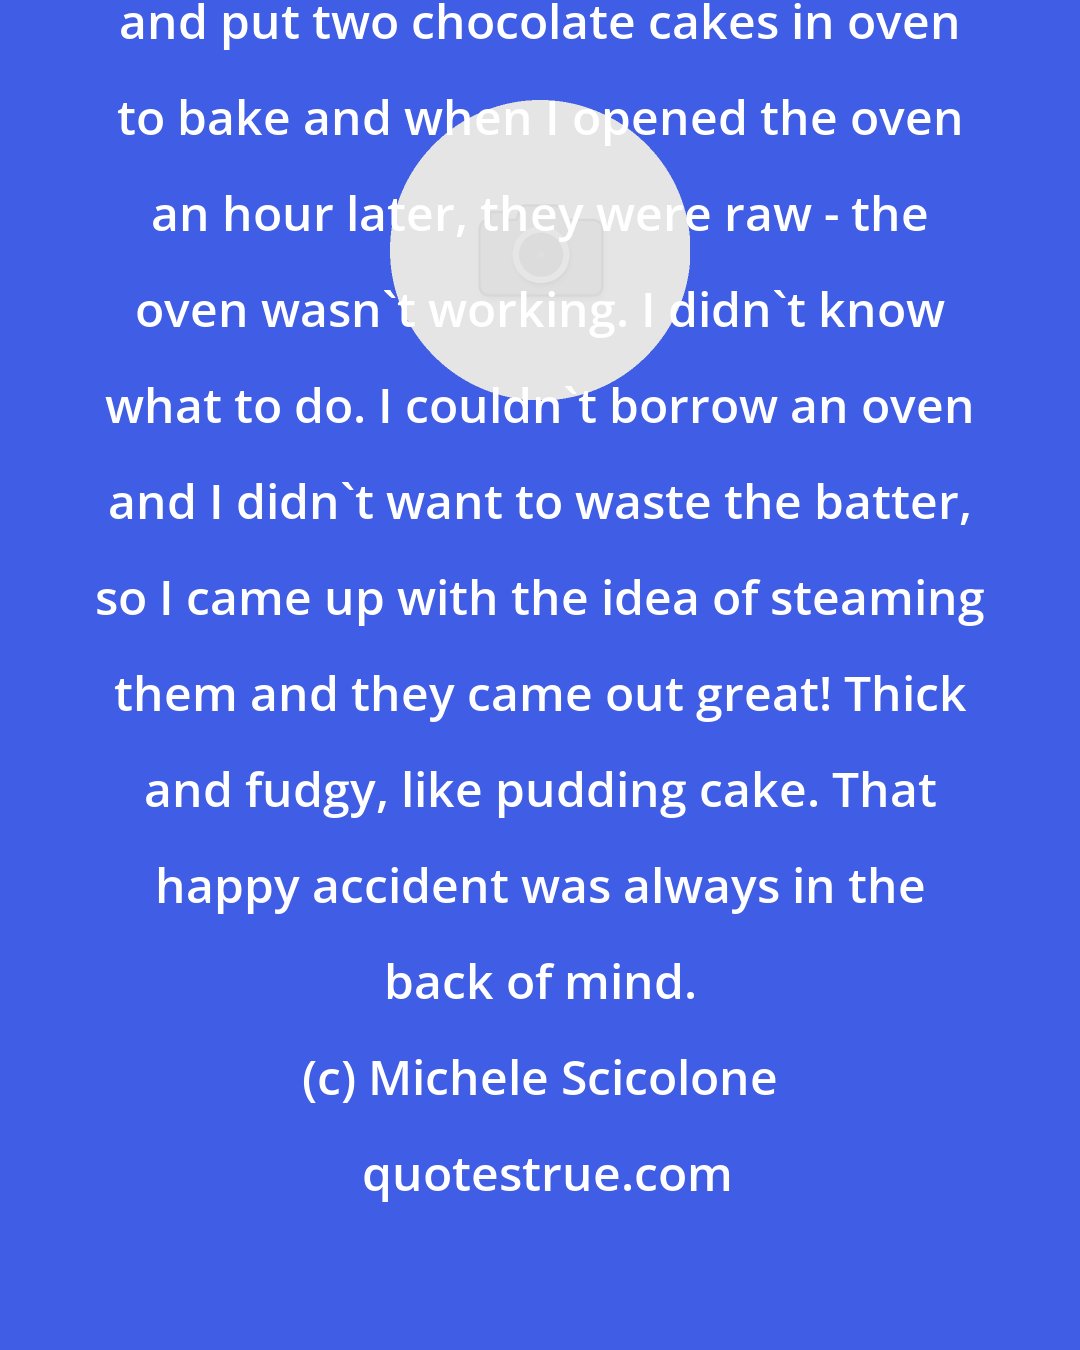 Michele Scicolone: I was baking cakes for a gourmet shop and put two chocolate cakes in oven to bake and when I opened the oven an hour later, they were raw - the oven wasn't working. I didn't know what to do. I couldn't borrow an oven and I didn't want to waste the batter, so I came up with the idea of steaming them and they came out great! Thick and fudgy, like pudding cake. That happy accident was always in the back of mind.